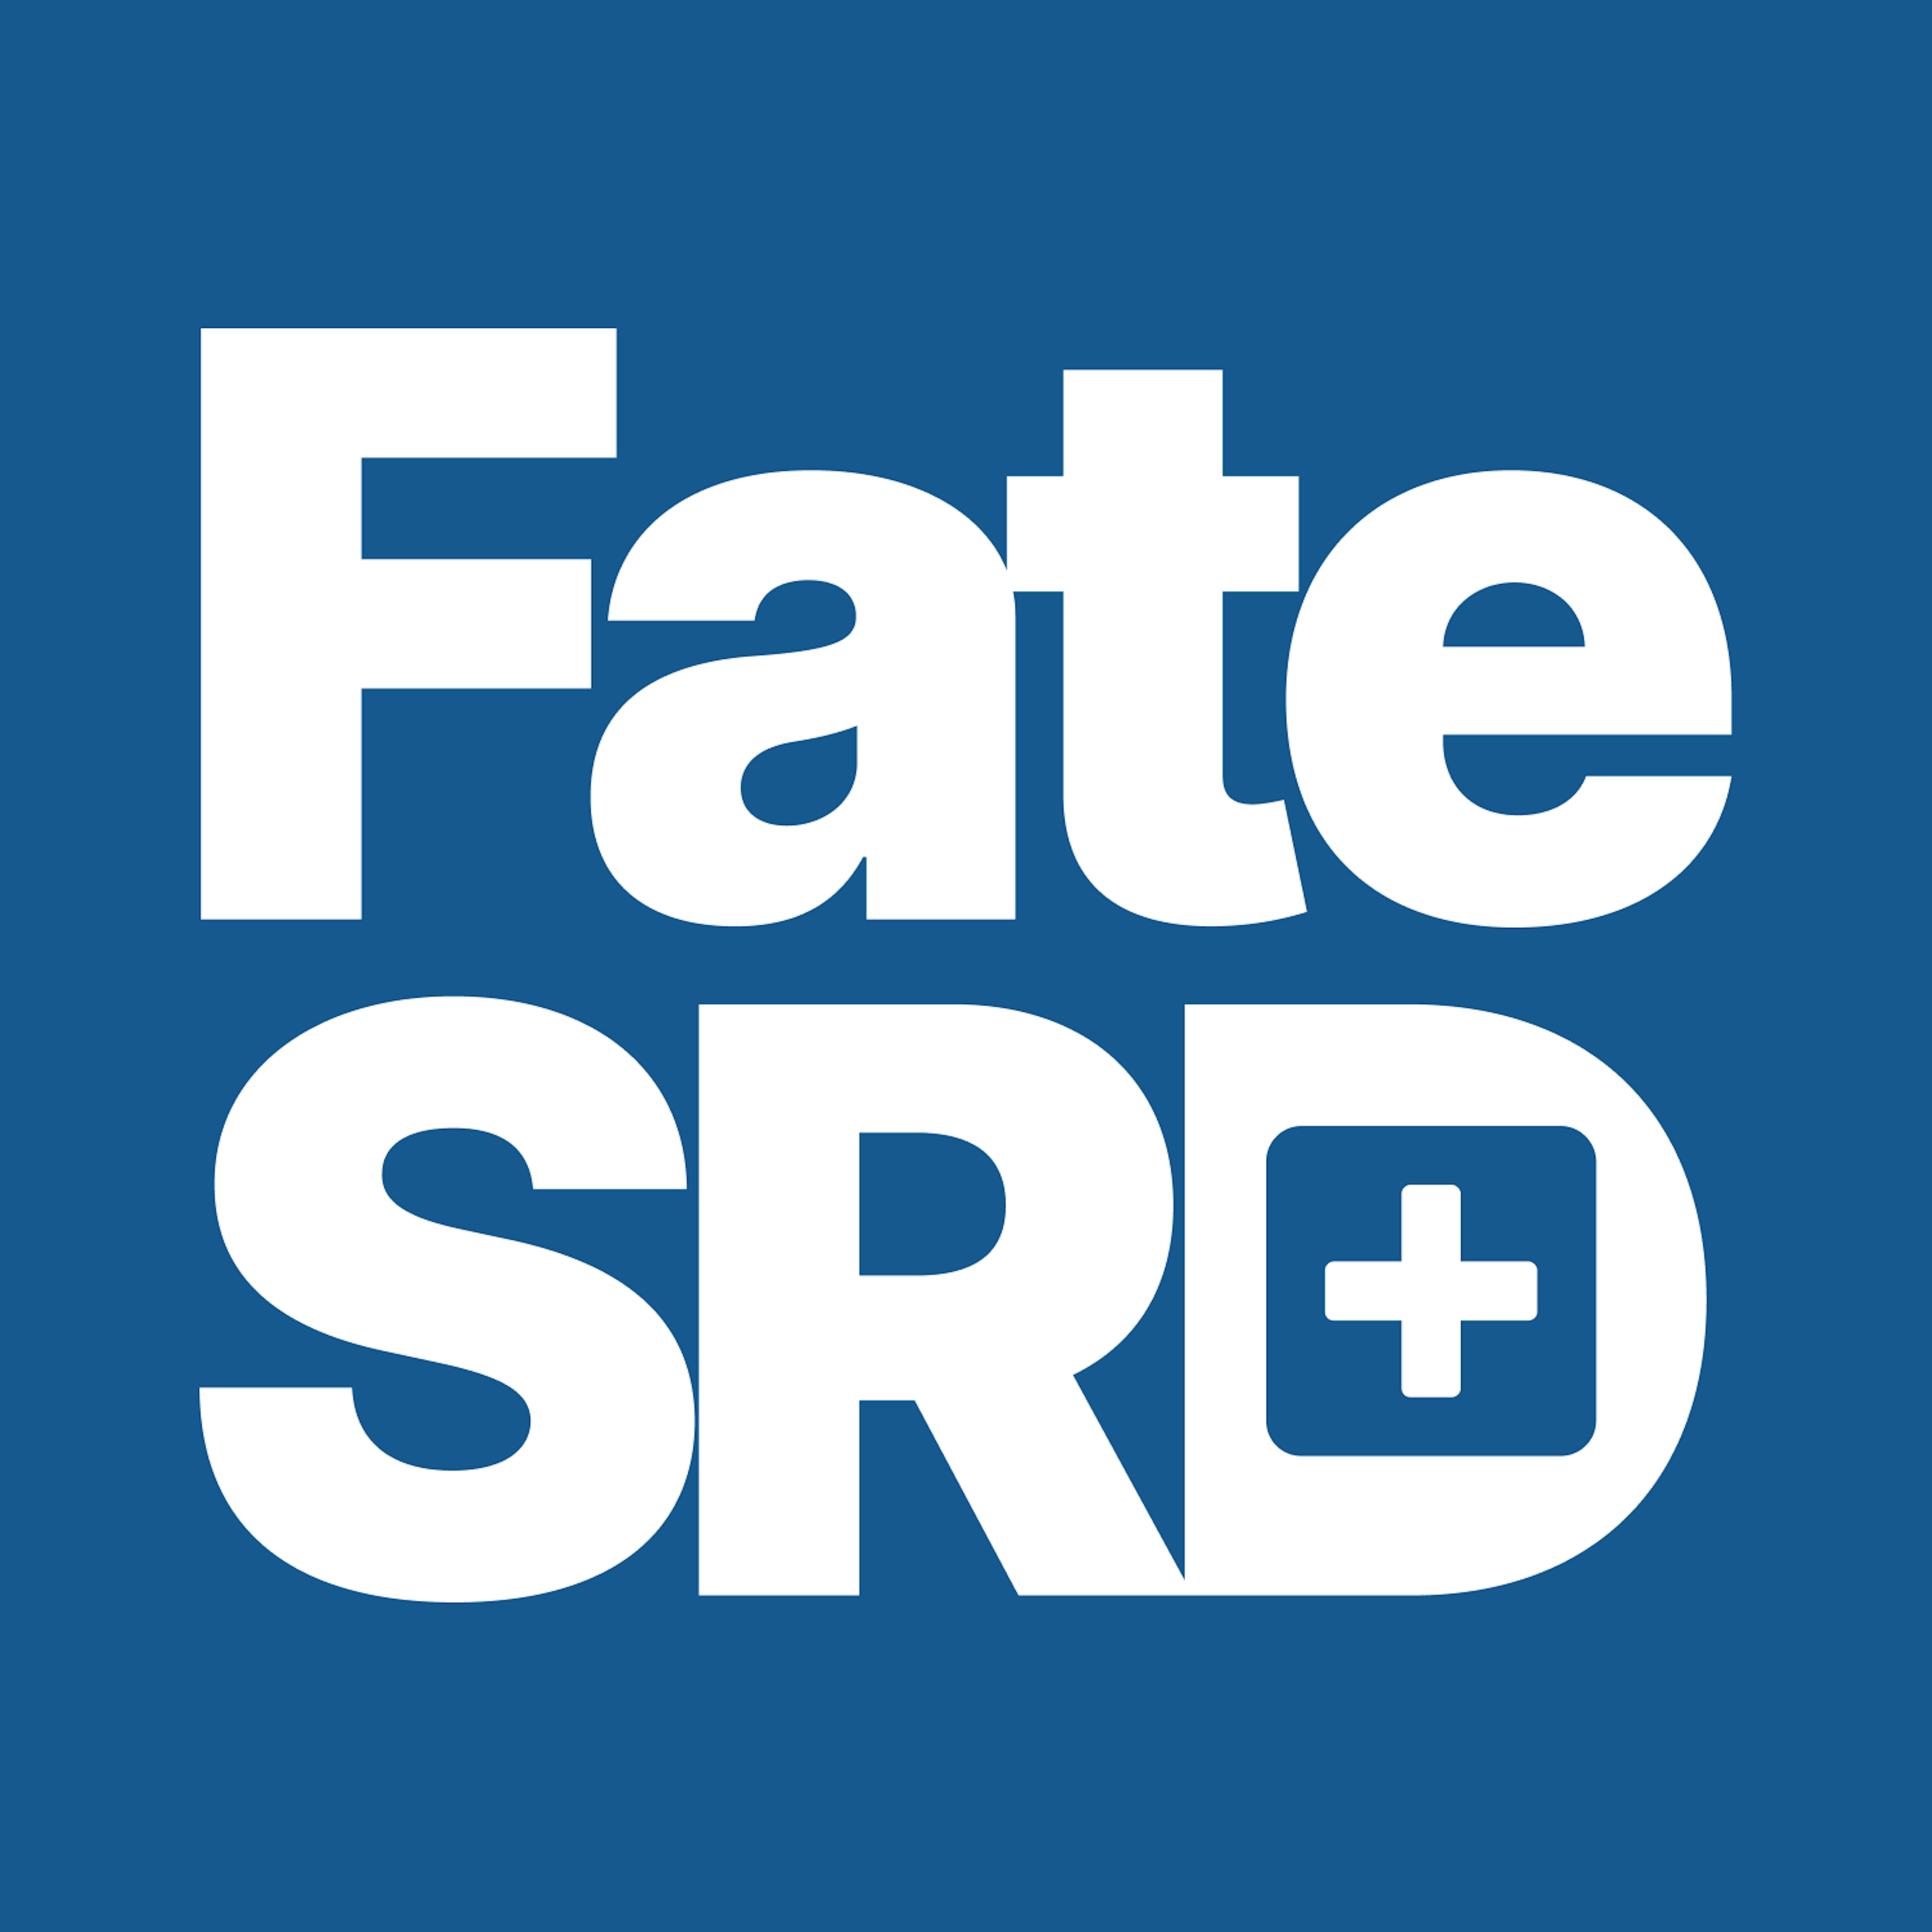 Fate SRD, a digital rules reference for the Fate RPG